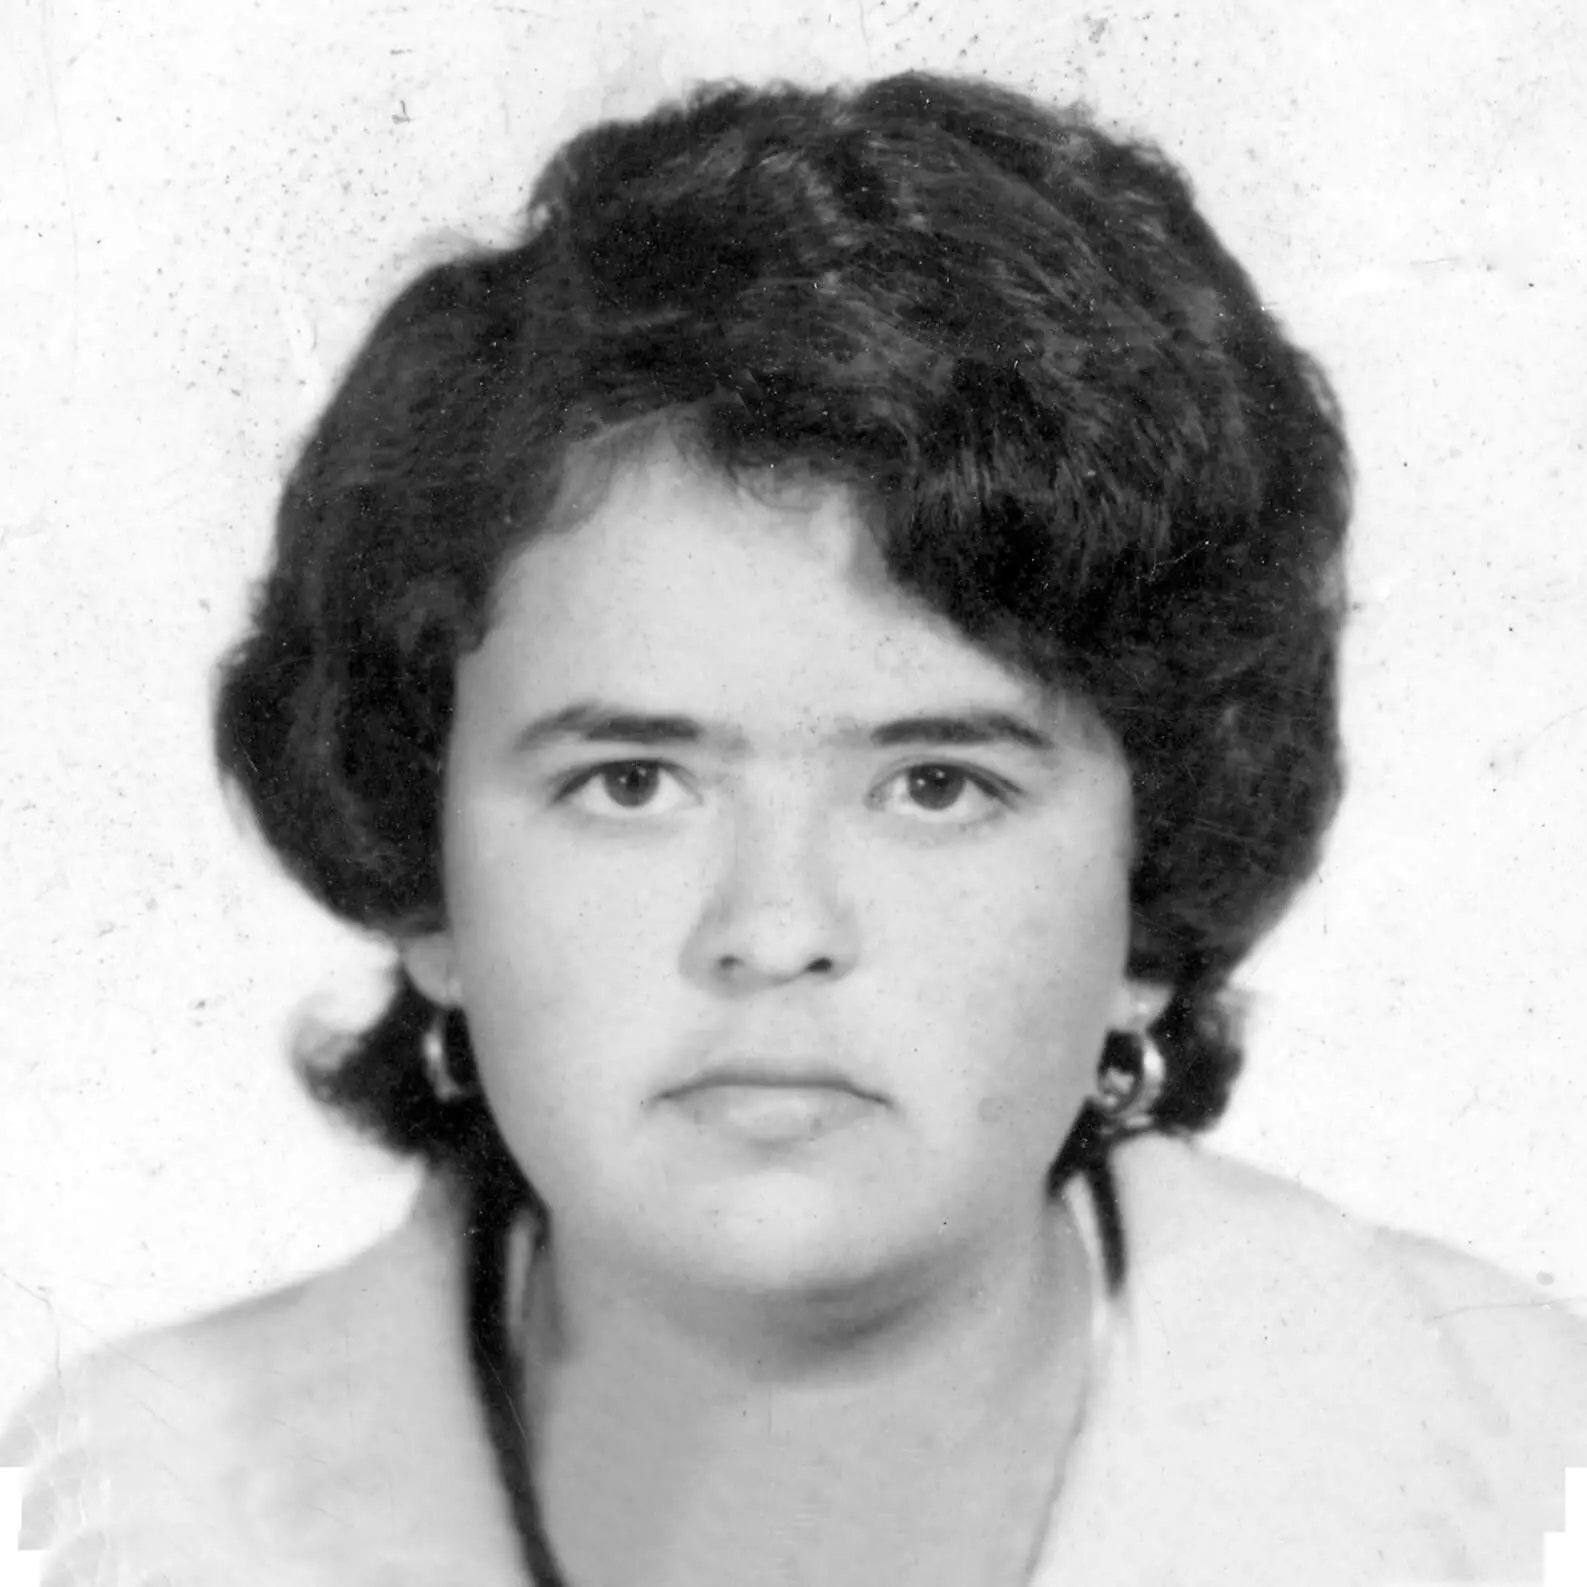 Black and white photo of a young woman with dark hair and dark eyes wearing hoop earrings. She is looking into the camera with a serious face, as instructed for passport photos.